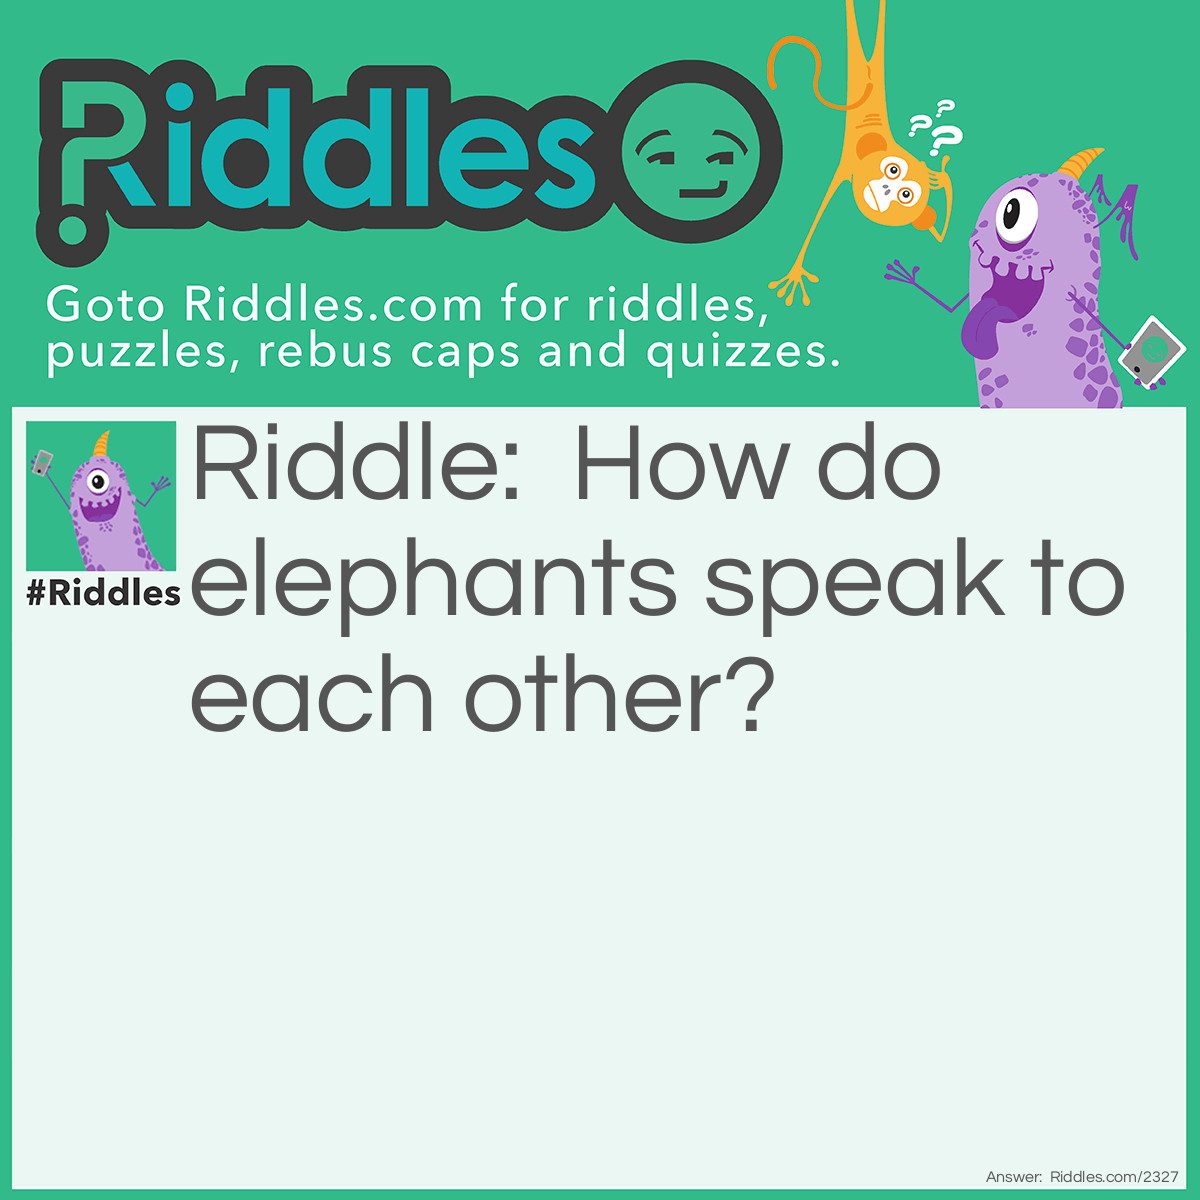 Riddle: How do elephants speak to each other? Answer: On 'elephones.